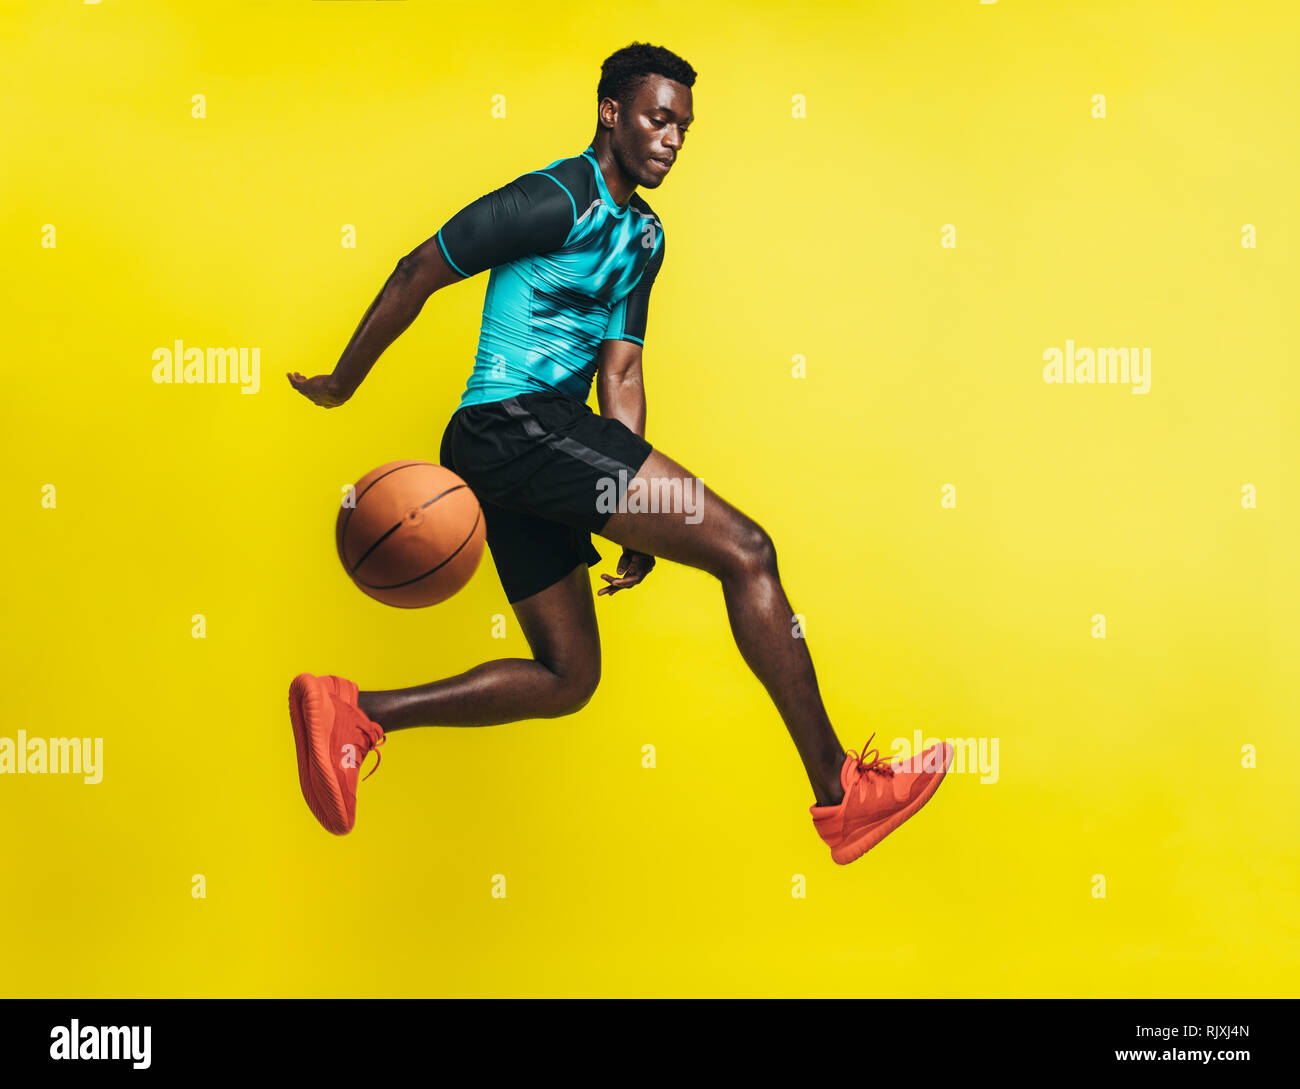 Young basketball player dribbling a ball over yellow background. Man in sportswear practicing basketball. Stock Photo